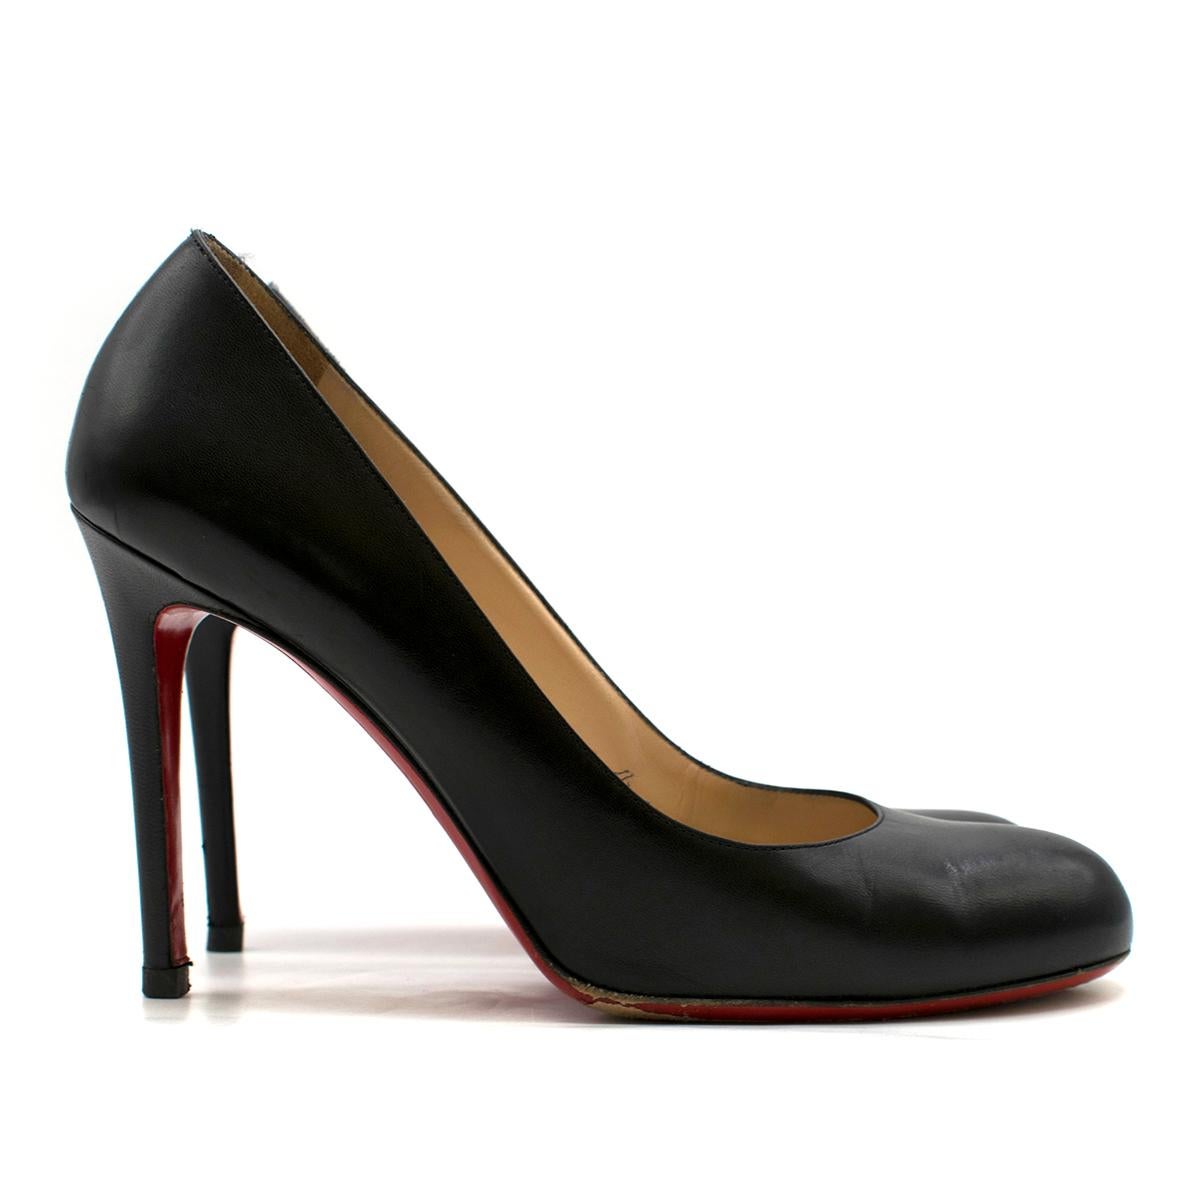 Christian Louboutin Black Simple Calf Leather Pumps 
 
- Black Simple Calf Leather Pumps
- Rounded toe, scalloped lines
- 100mm Leather-covered stiletto heel
- Low-cut vamp 
- Slips on 
- Lined with beige leather
- Signature red leather sole